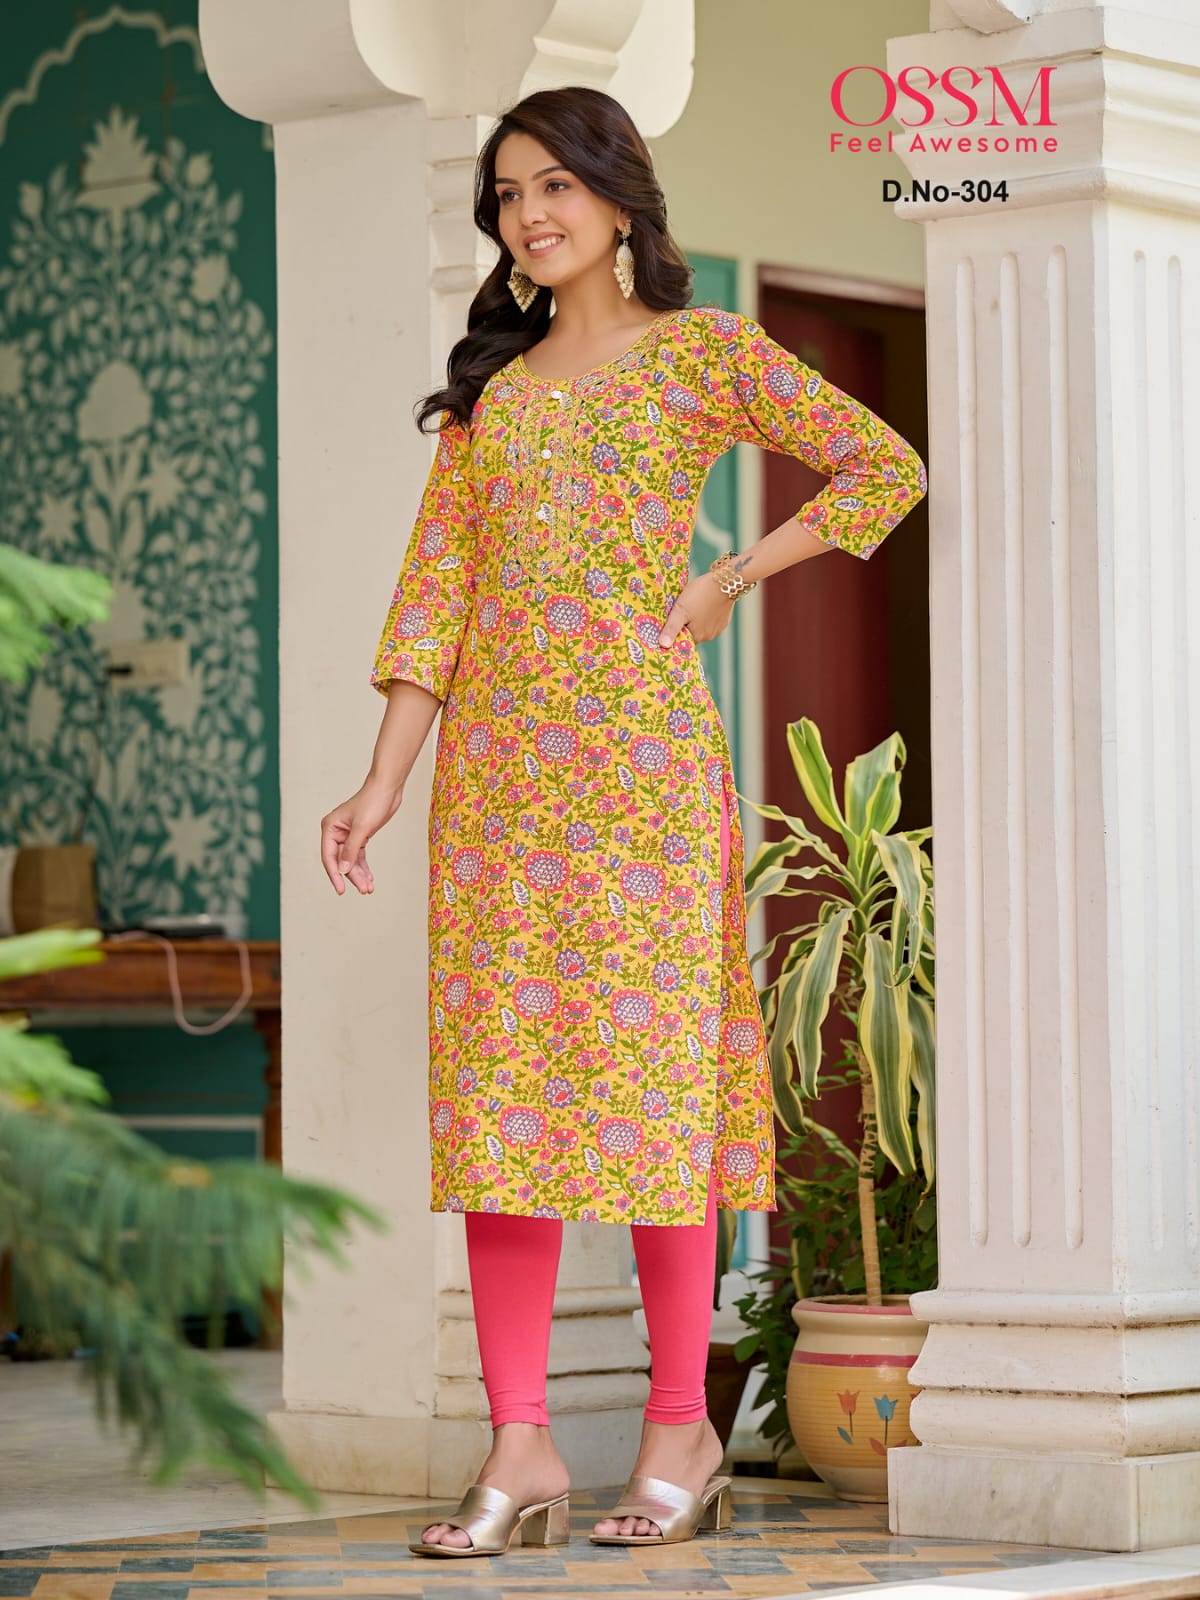 Branded Pure Cotton Kurti Available Size : M, L, XL, 2XL Price